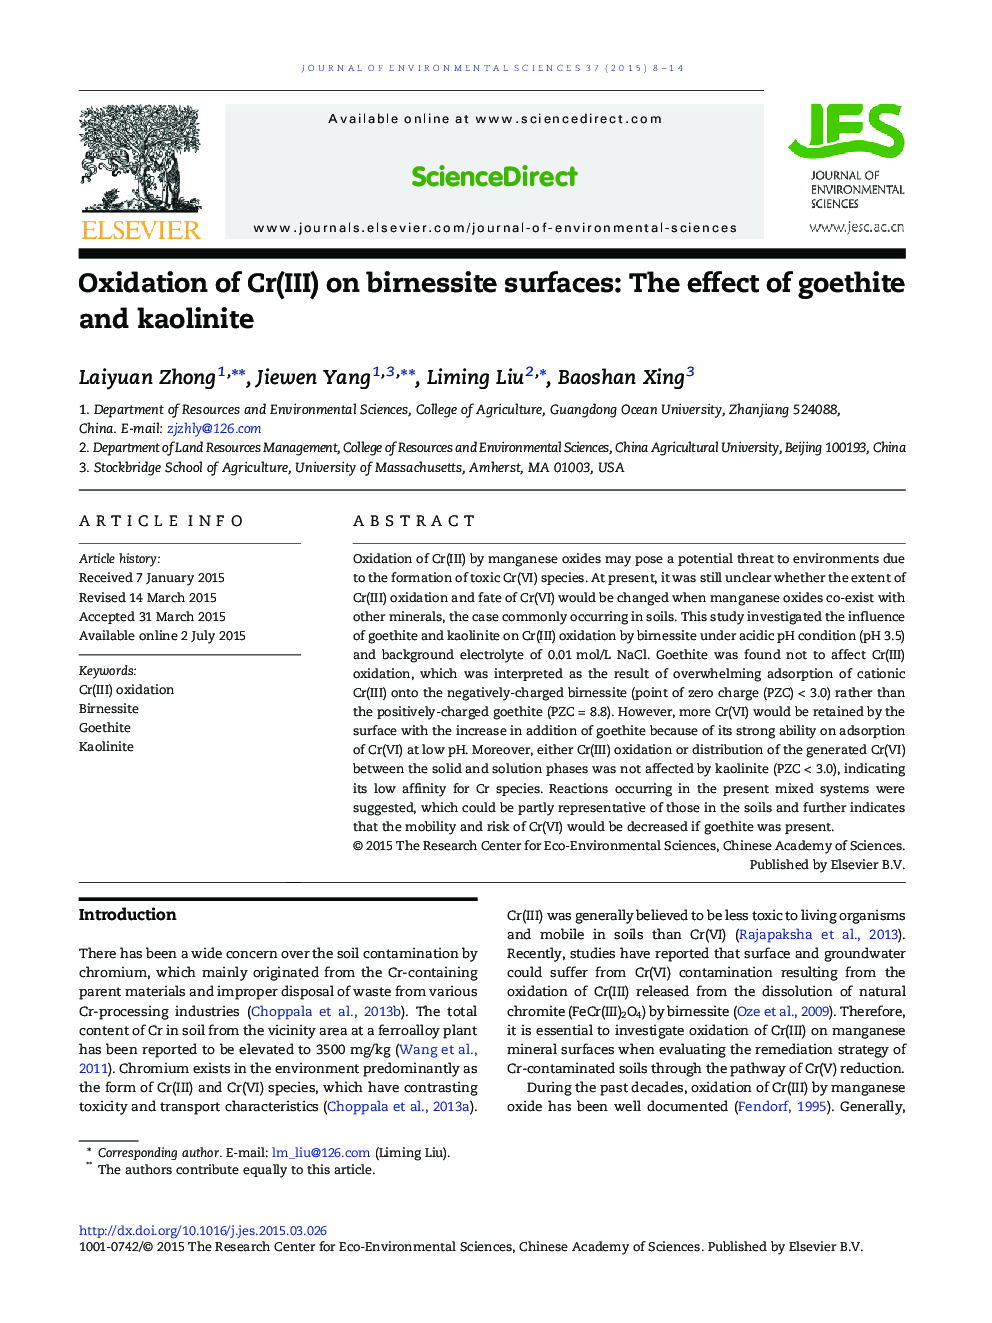 Oxidation of Cr(III) on birnessite surfaces: The effect of goethite and kaolinite